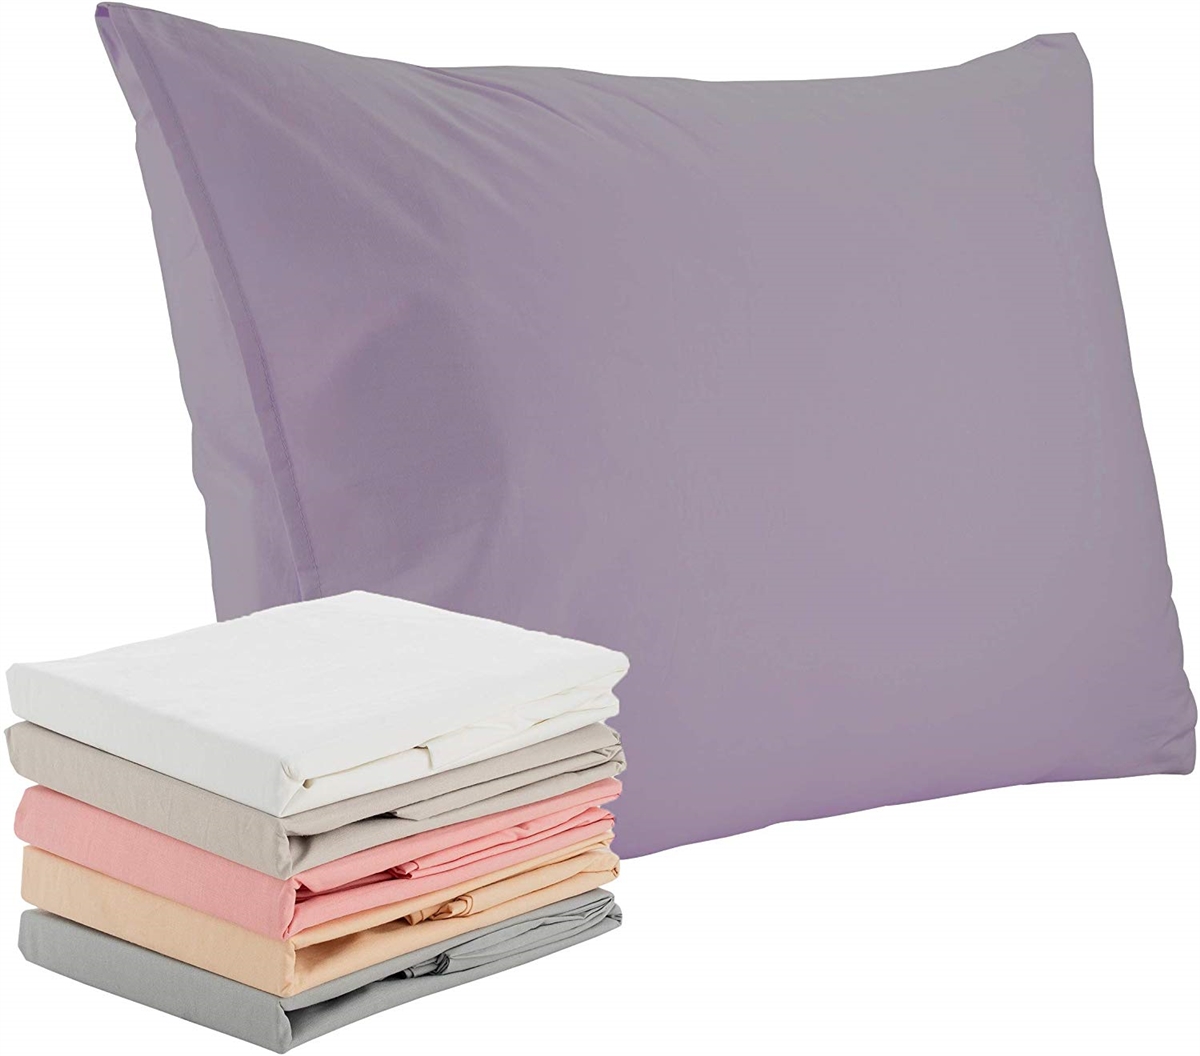 Superior Linen Set of 2 Pillow Cases in Lavender